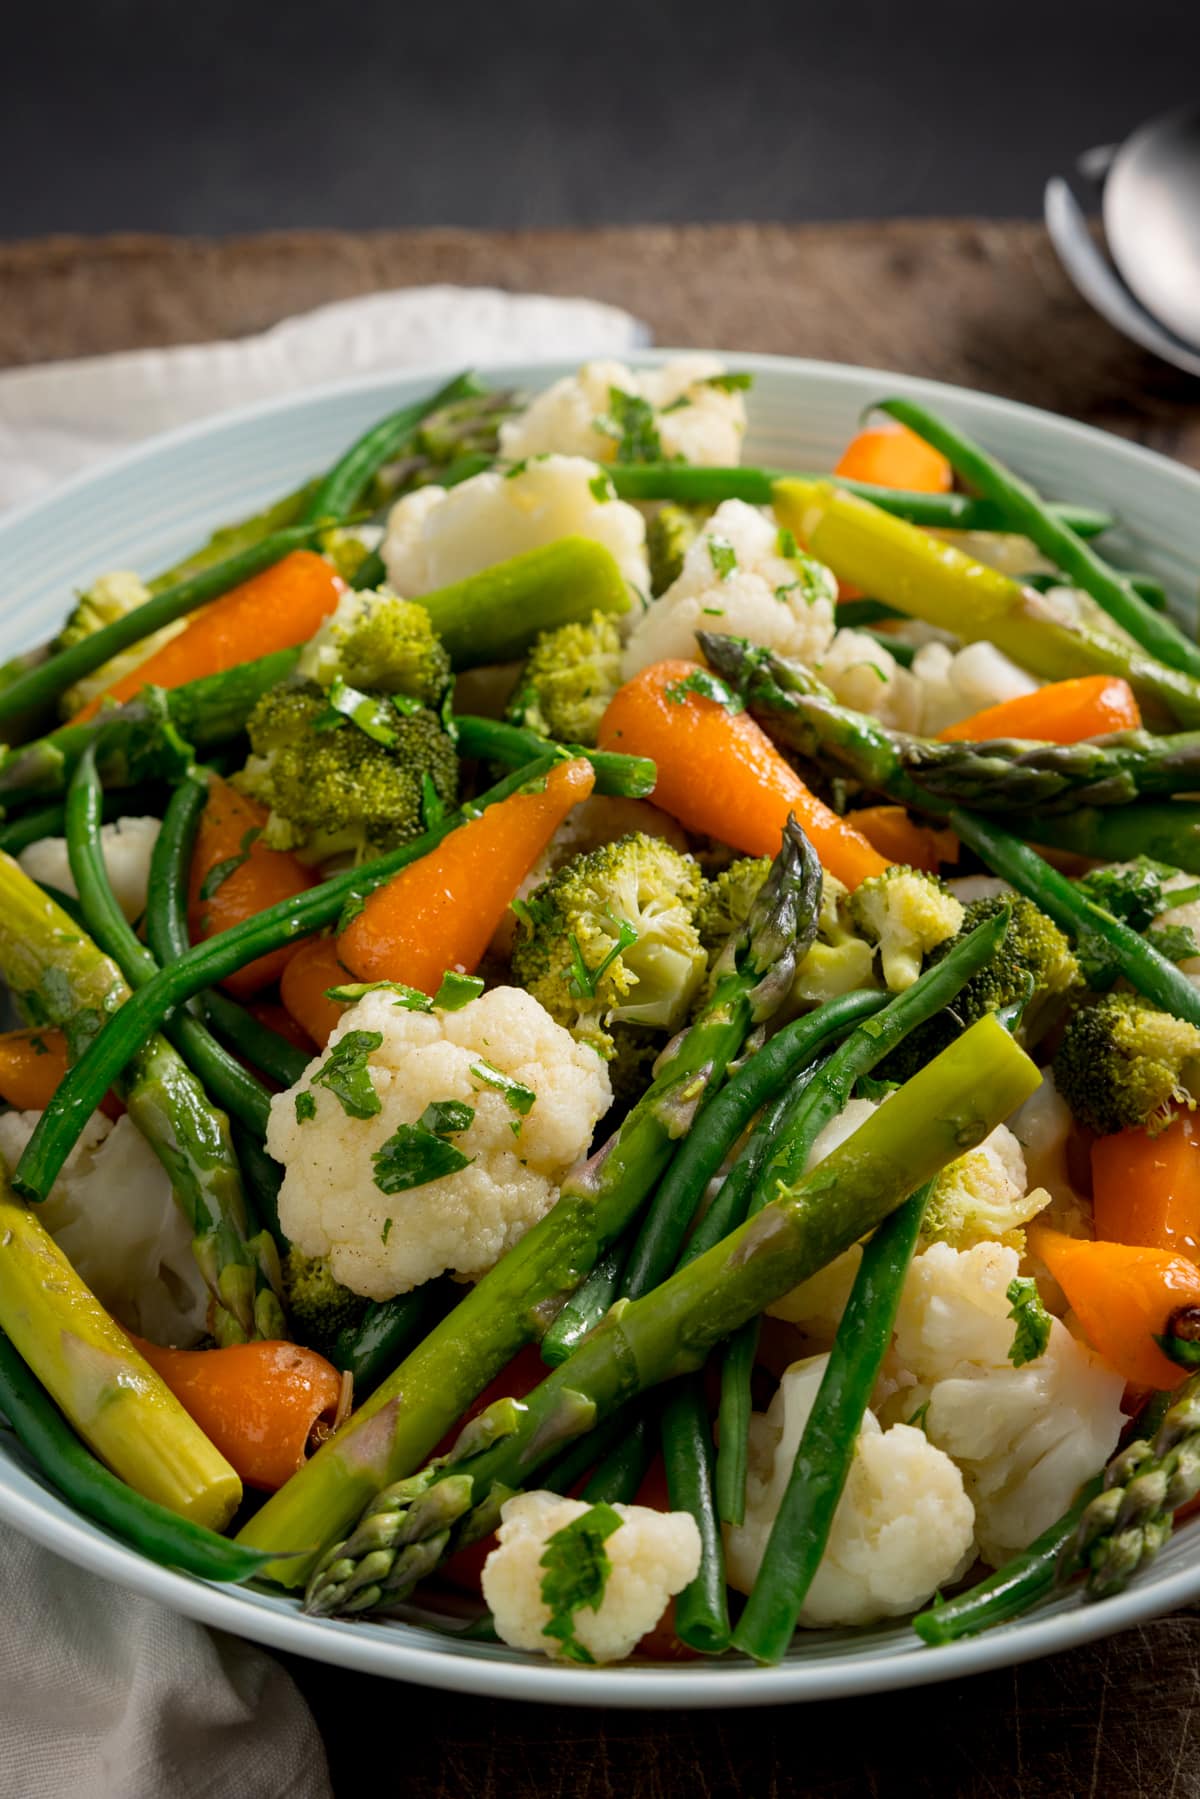 How to Make and Season Steamed Vegetables